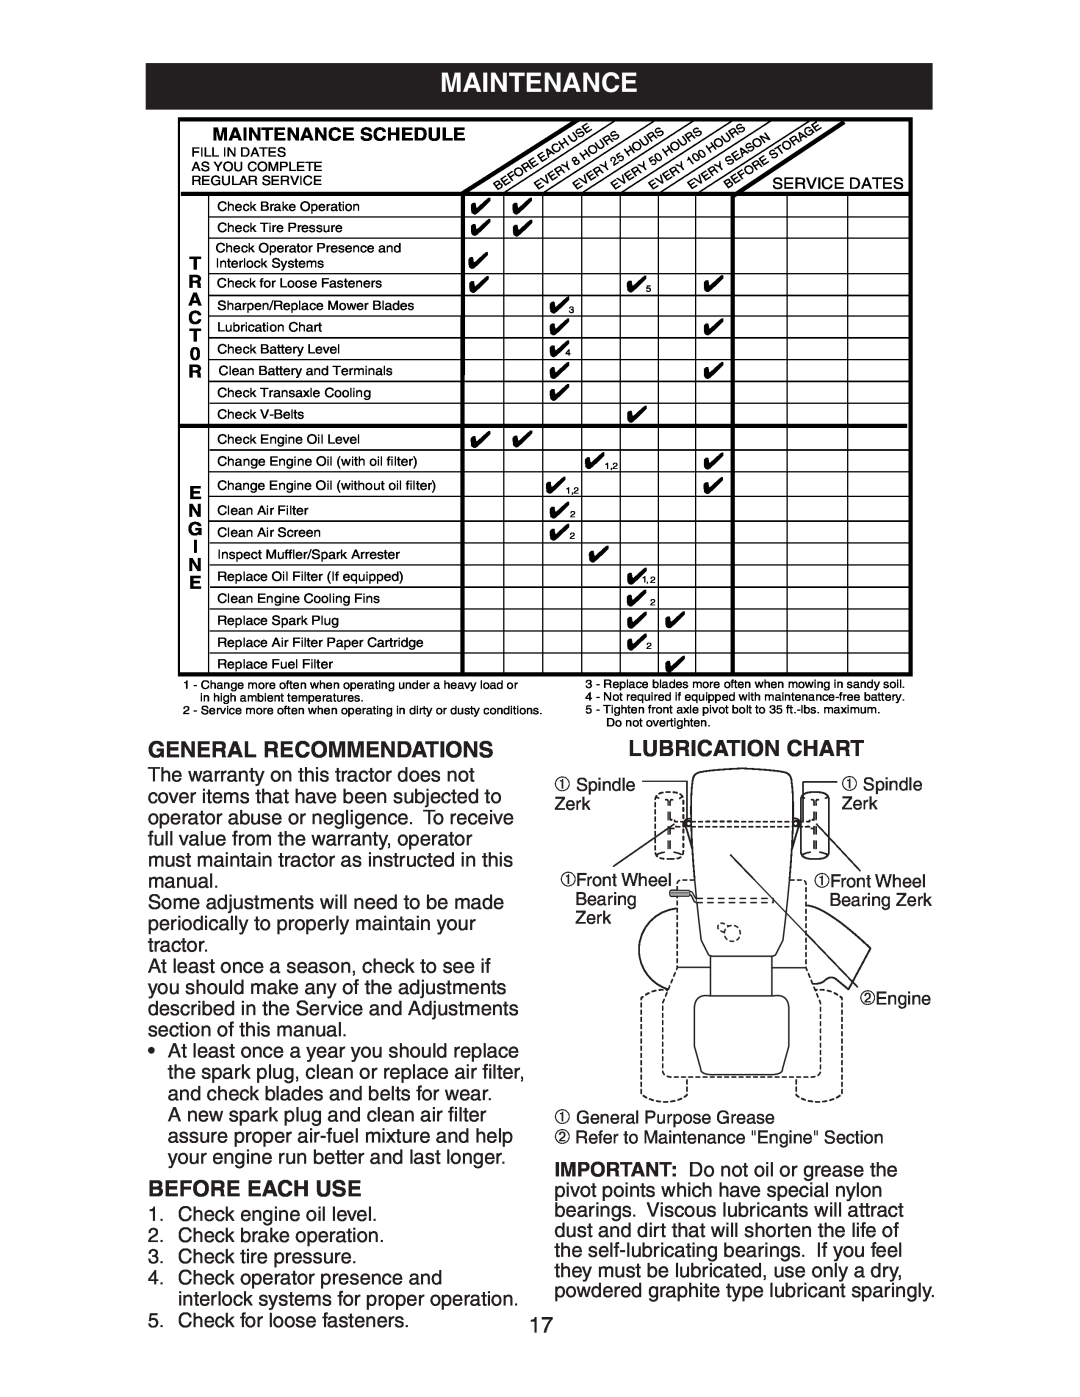 Electrolux AG15538A manual General Recommendations, Lubrication Chart, Before Each Use, Maintenance Schedule, ➁Engine 